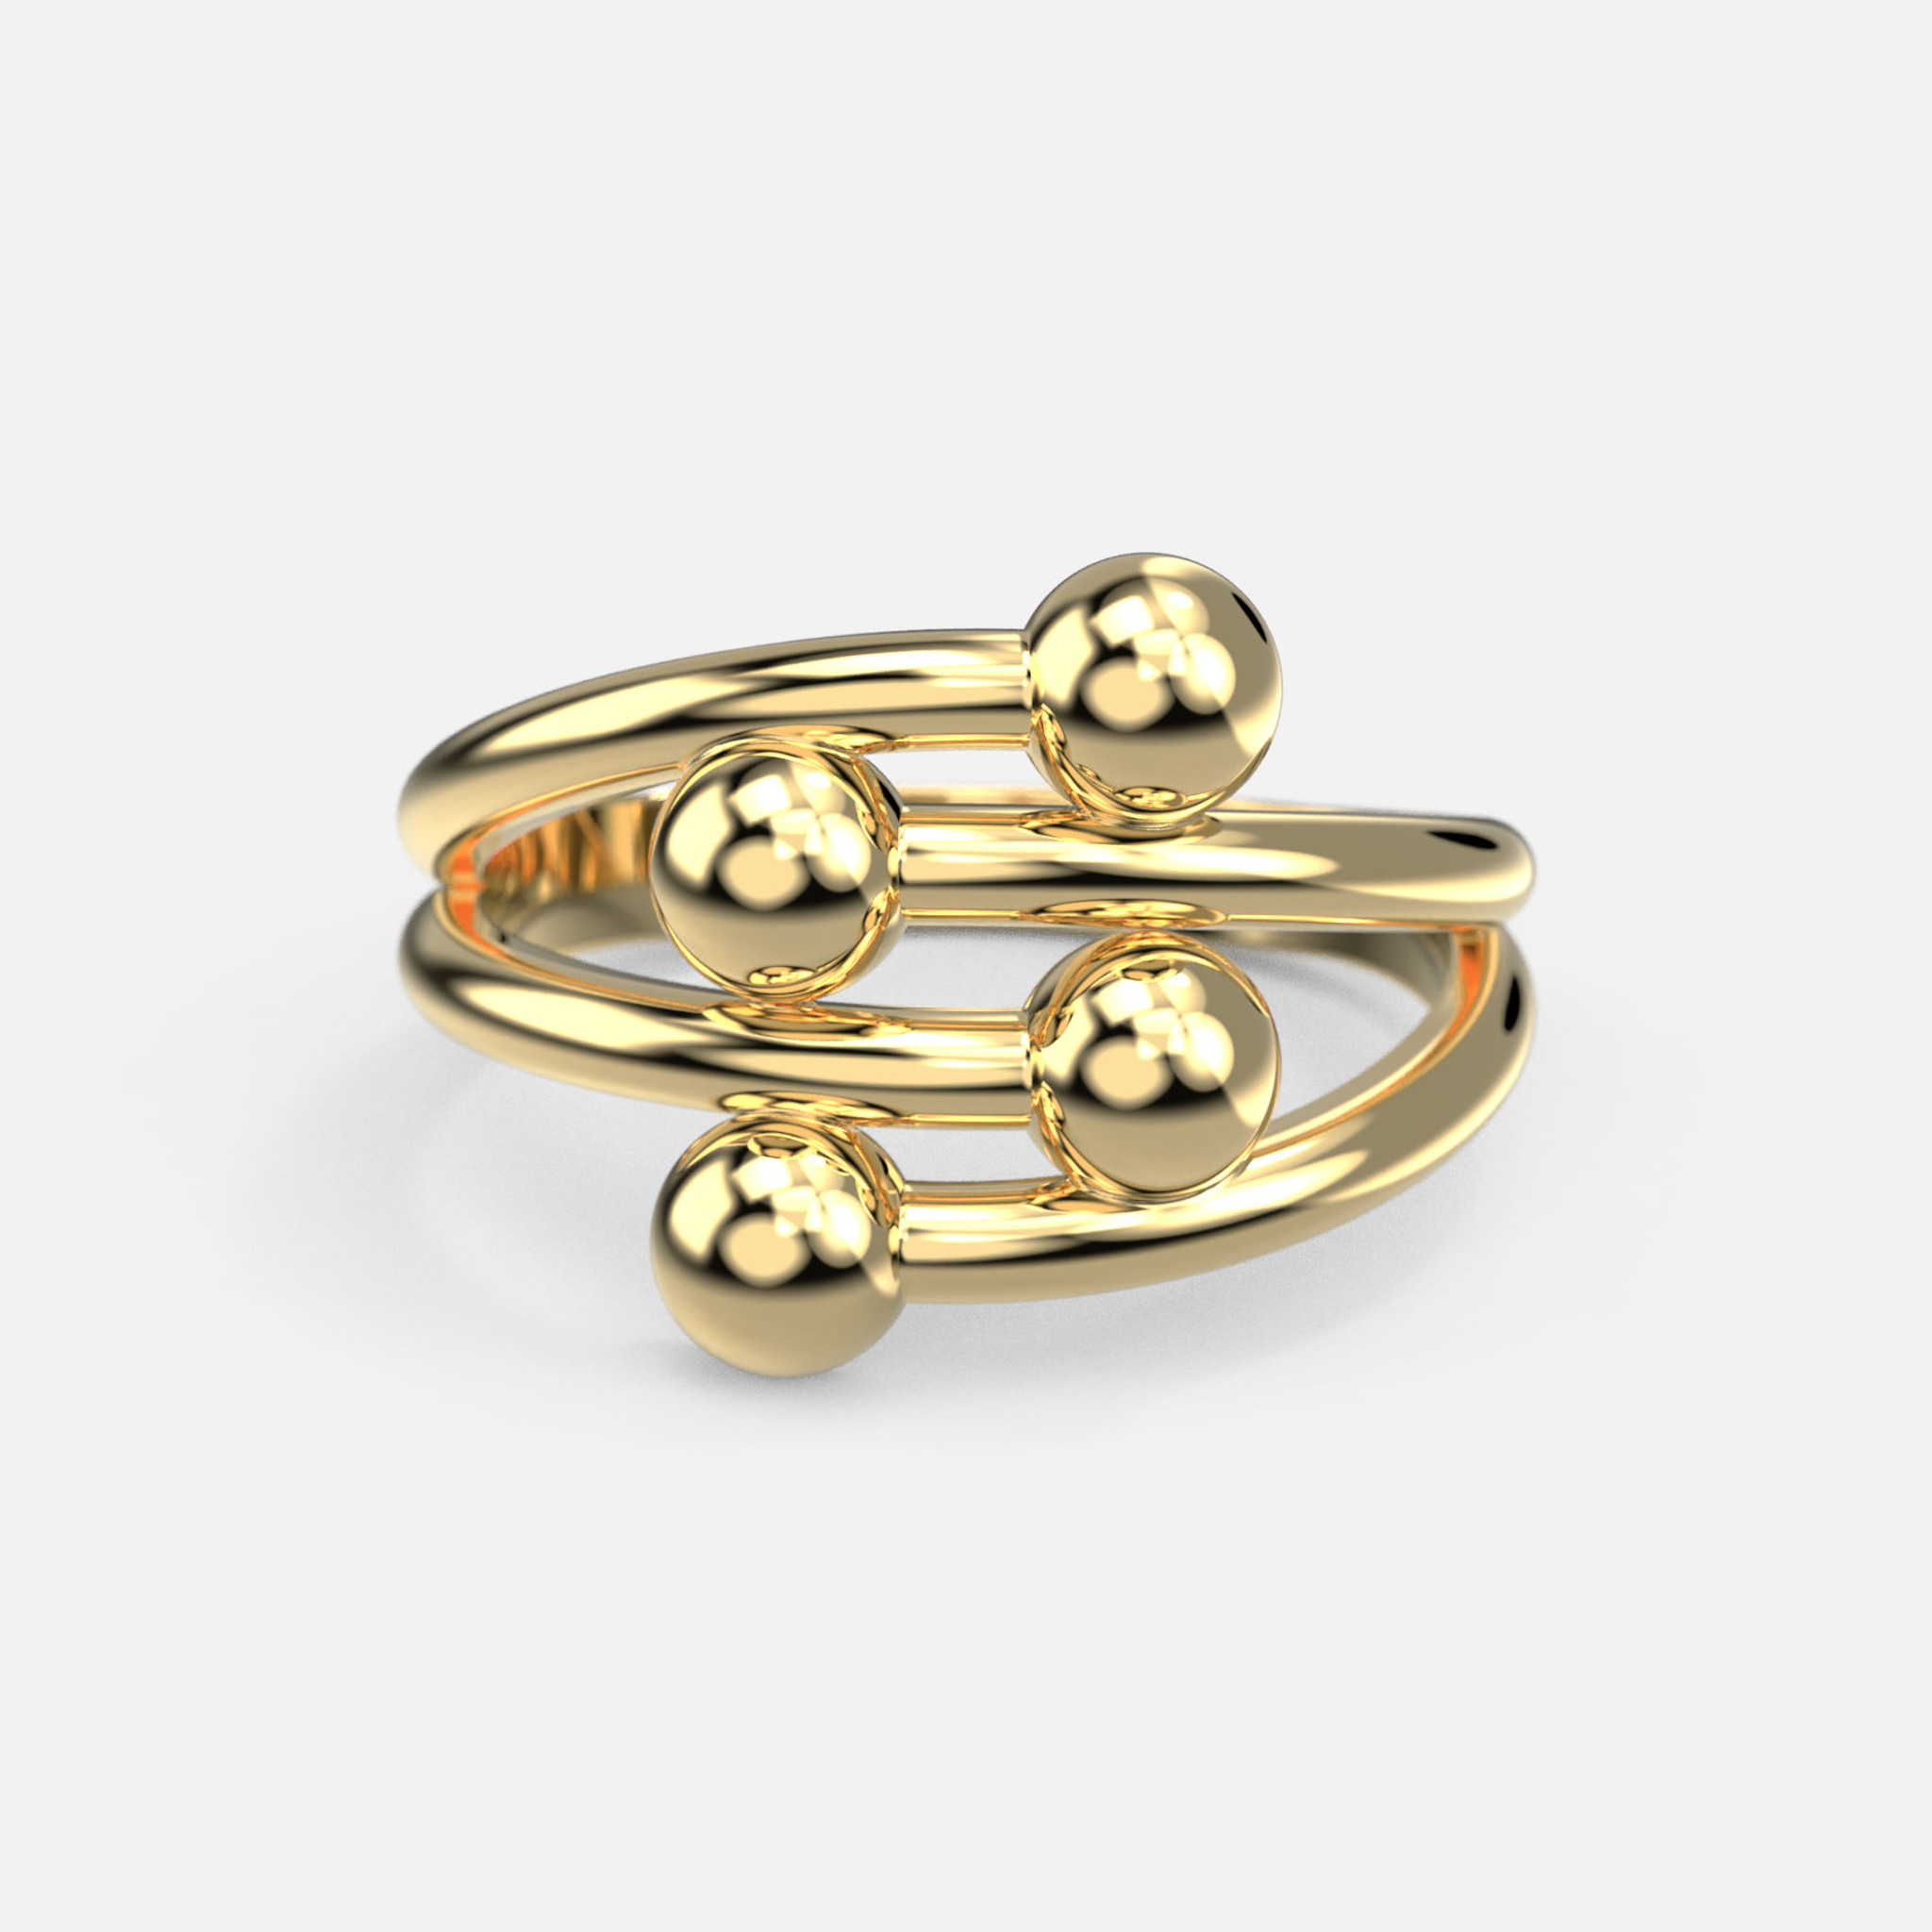 Elevate your style effortlessly: a front view of our solid 10k yellow gold Four Band Ball Ring, featuring a unique and alluring design.